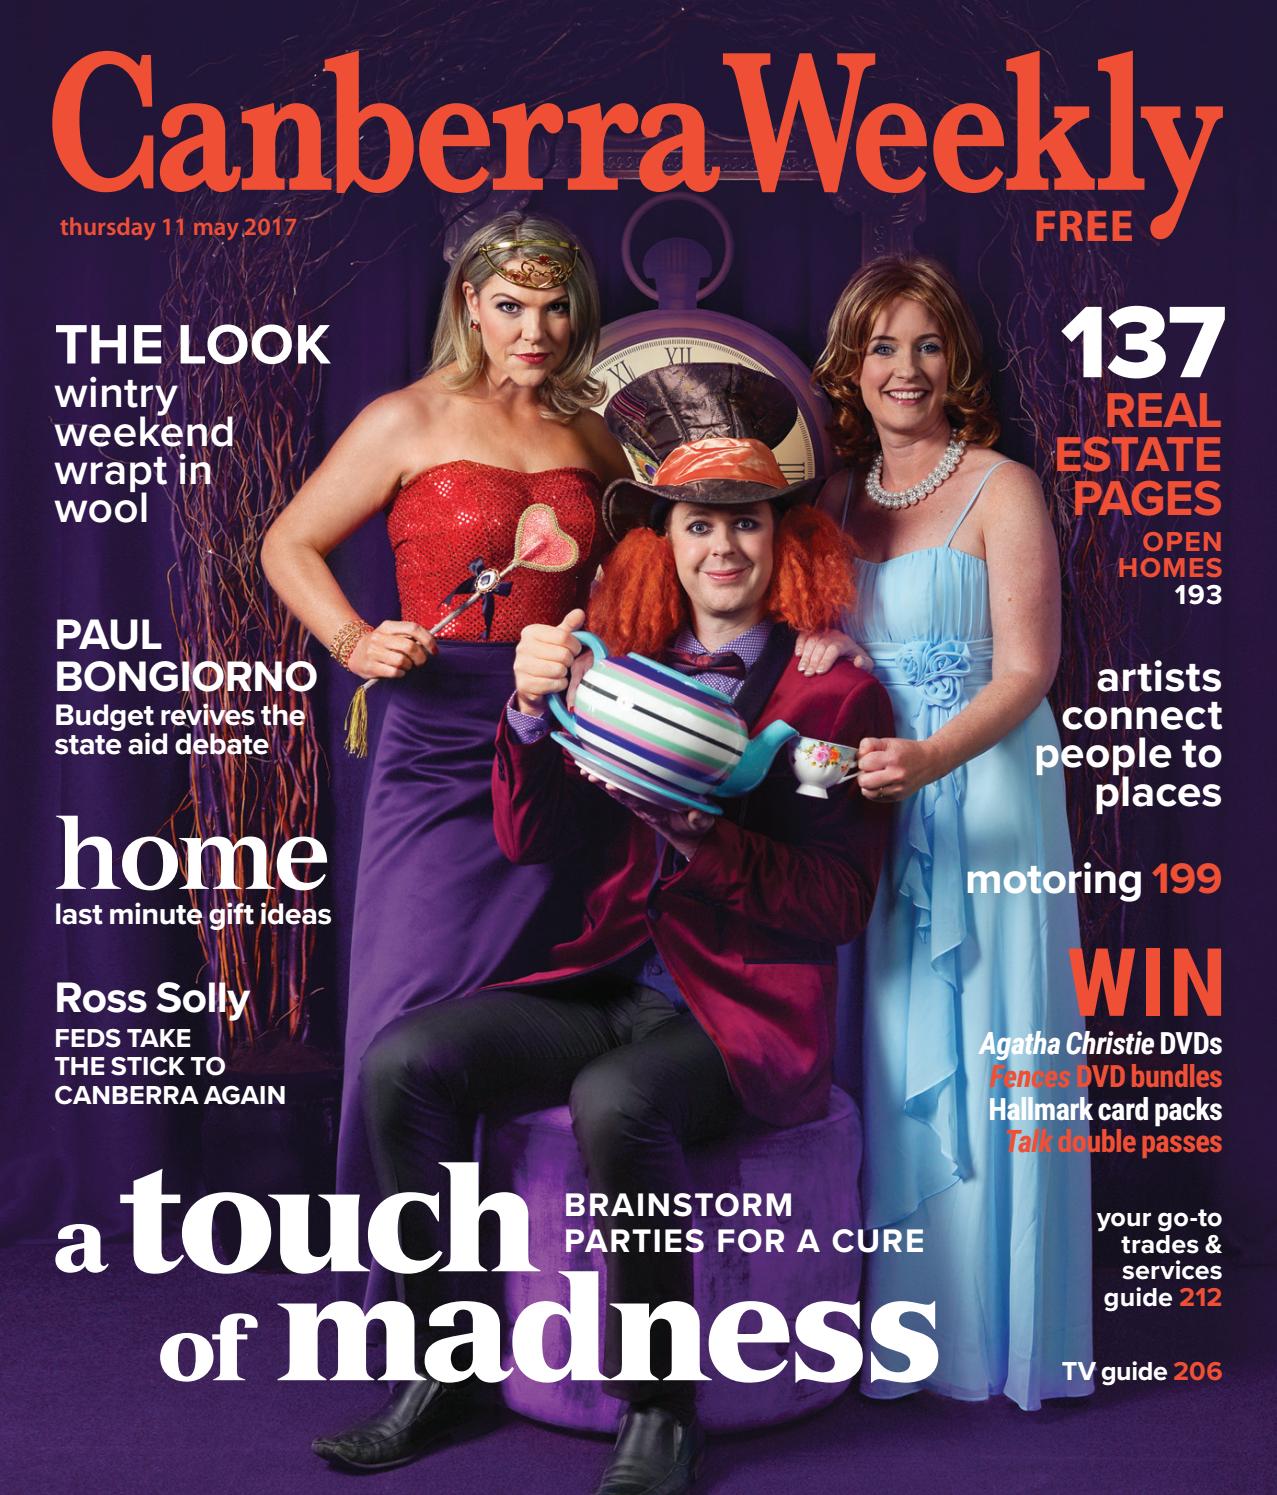 tv guide canberra